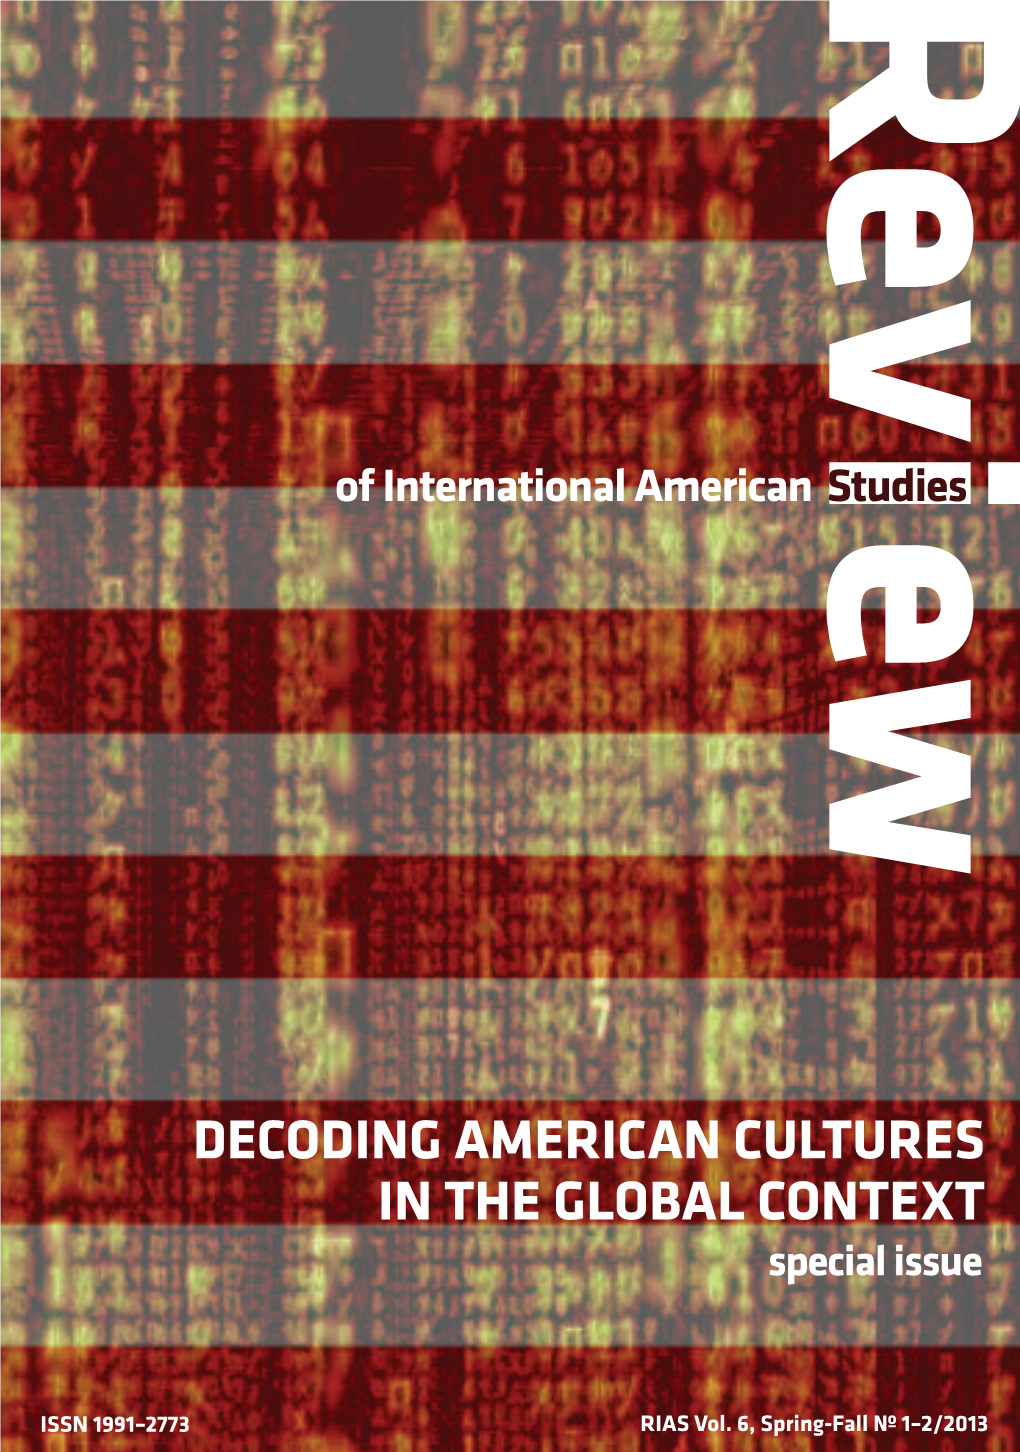 DECODING AMERICAN CULTURES in the Global Context R IA S